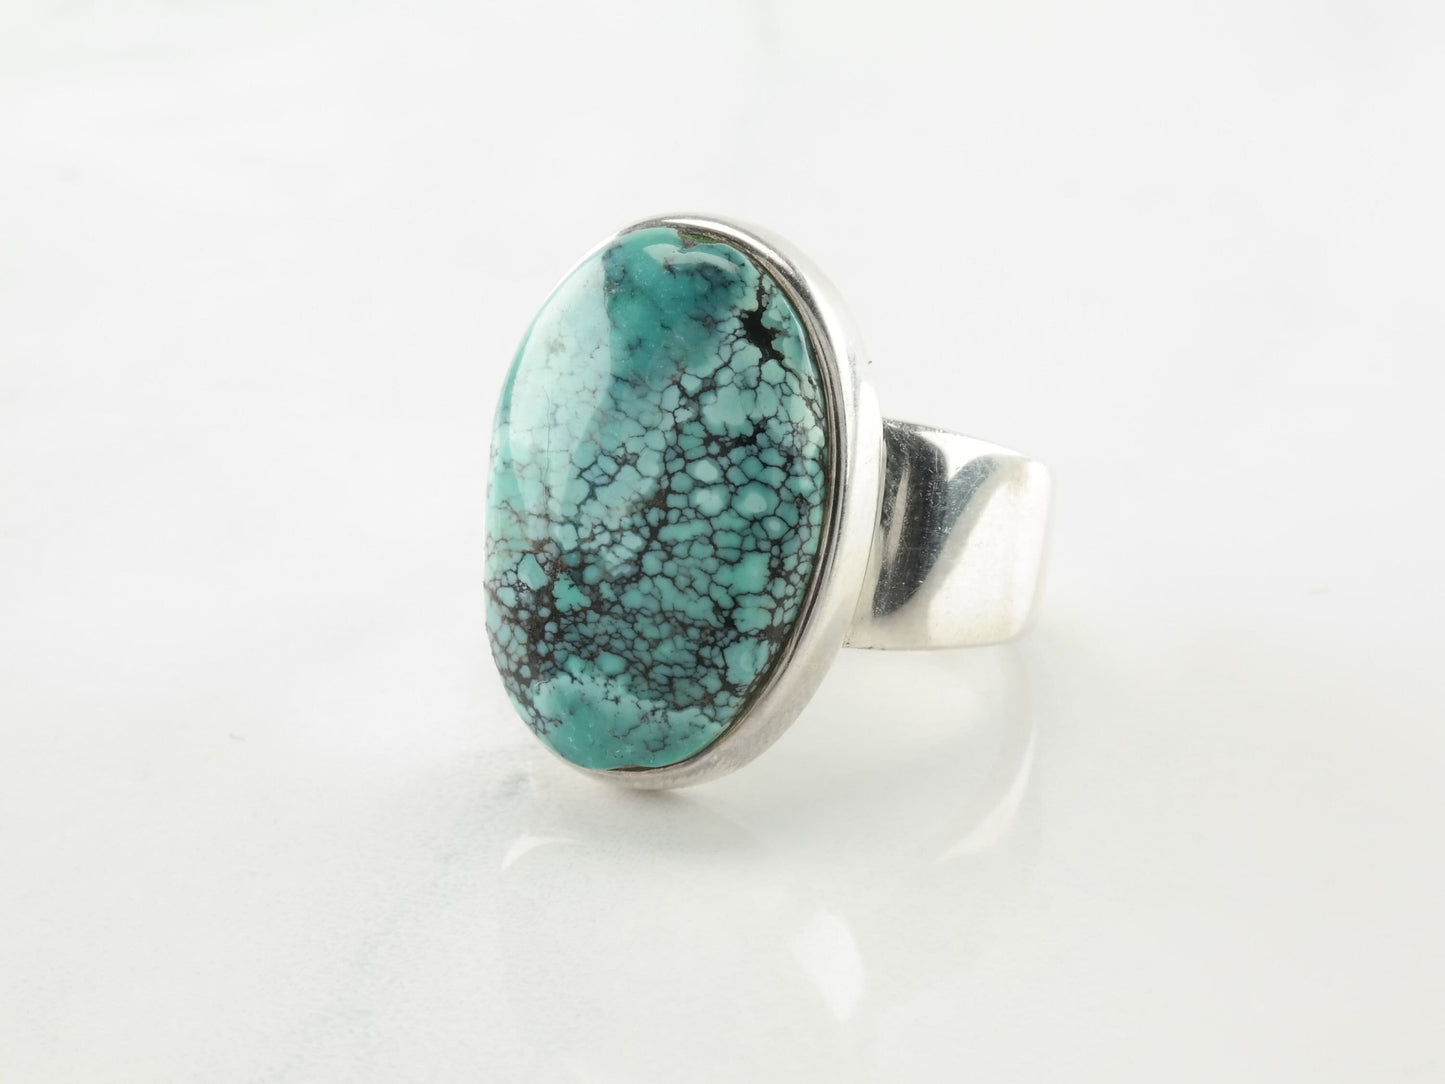 Vintage Southwest Ring Spiderweb Turquoise Sterling Silver Size 8